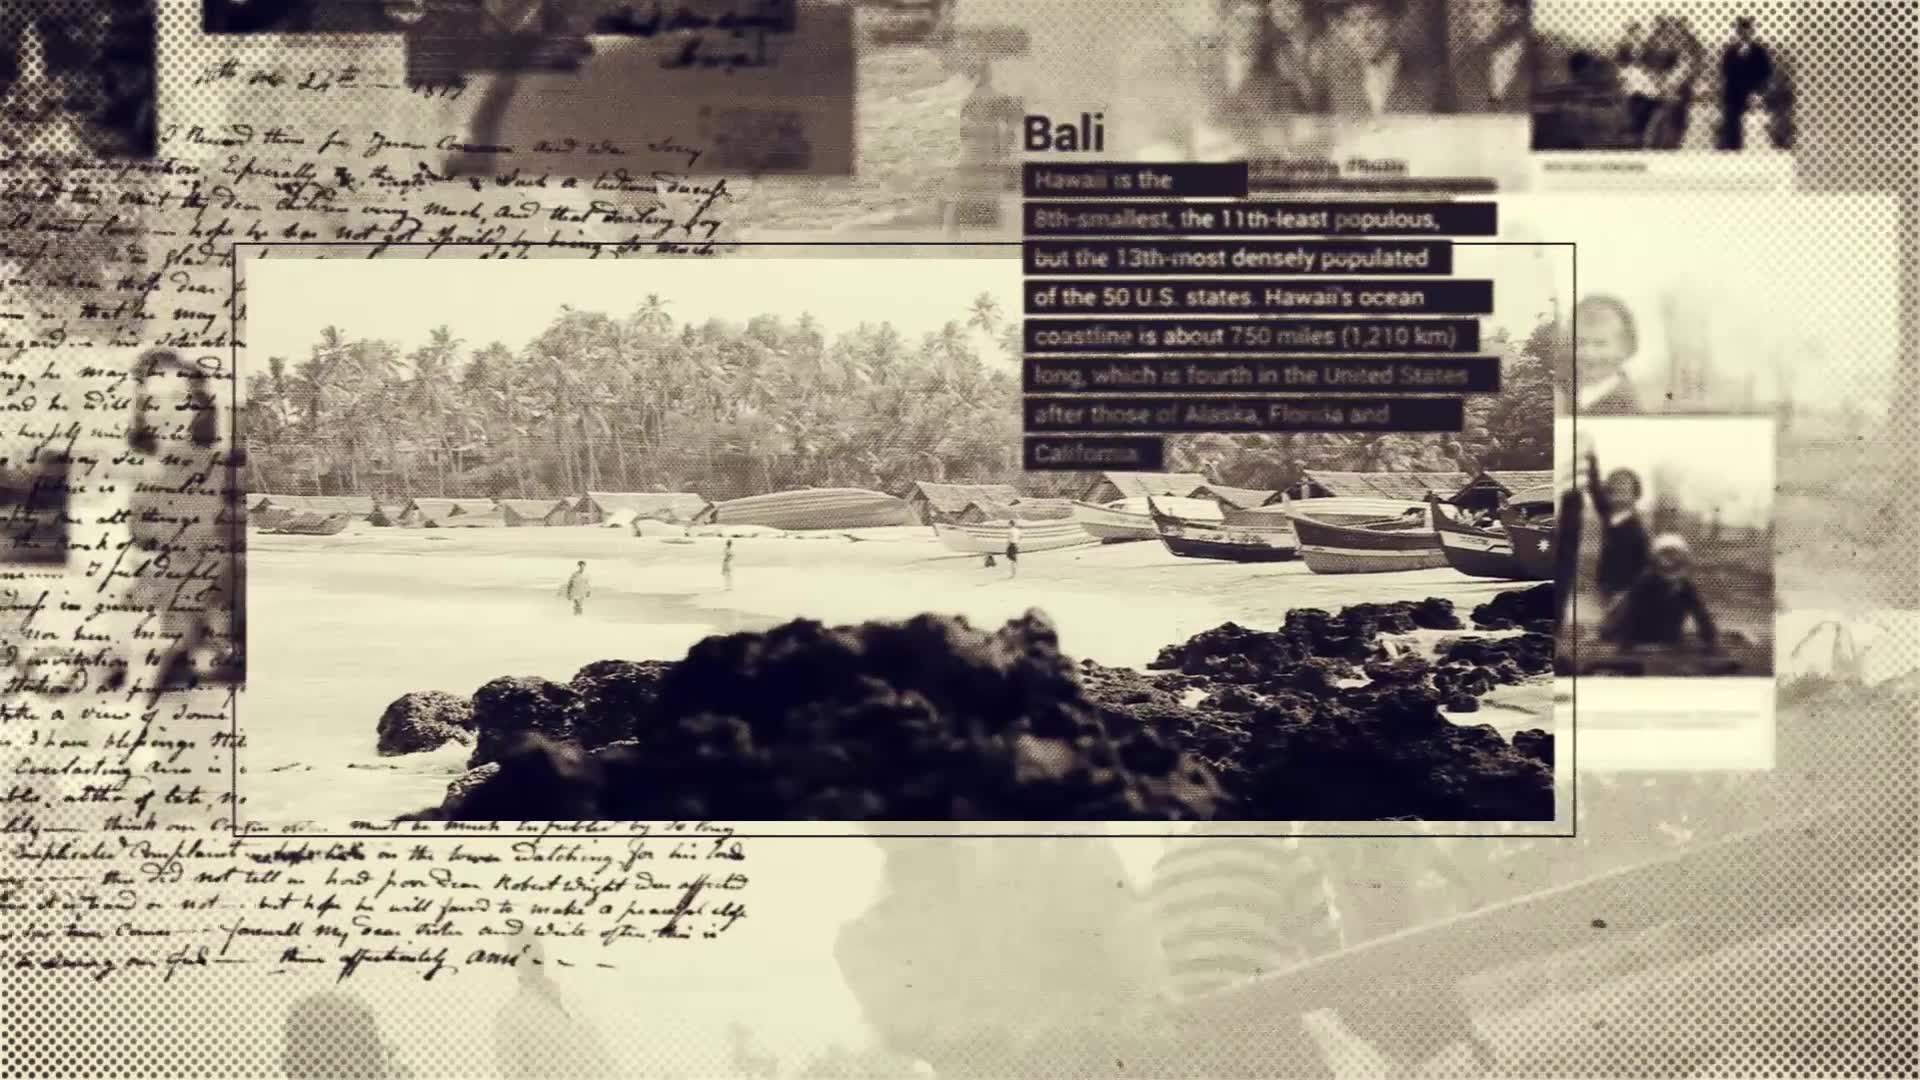 History in Photographs - Download Videohive 9012226